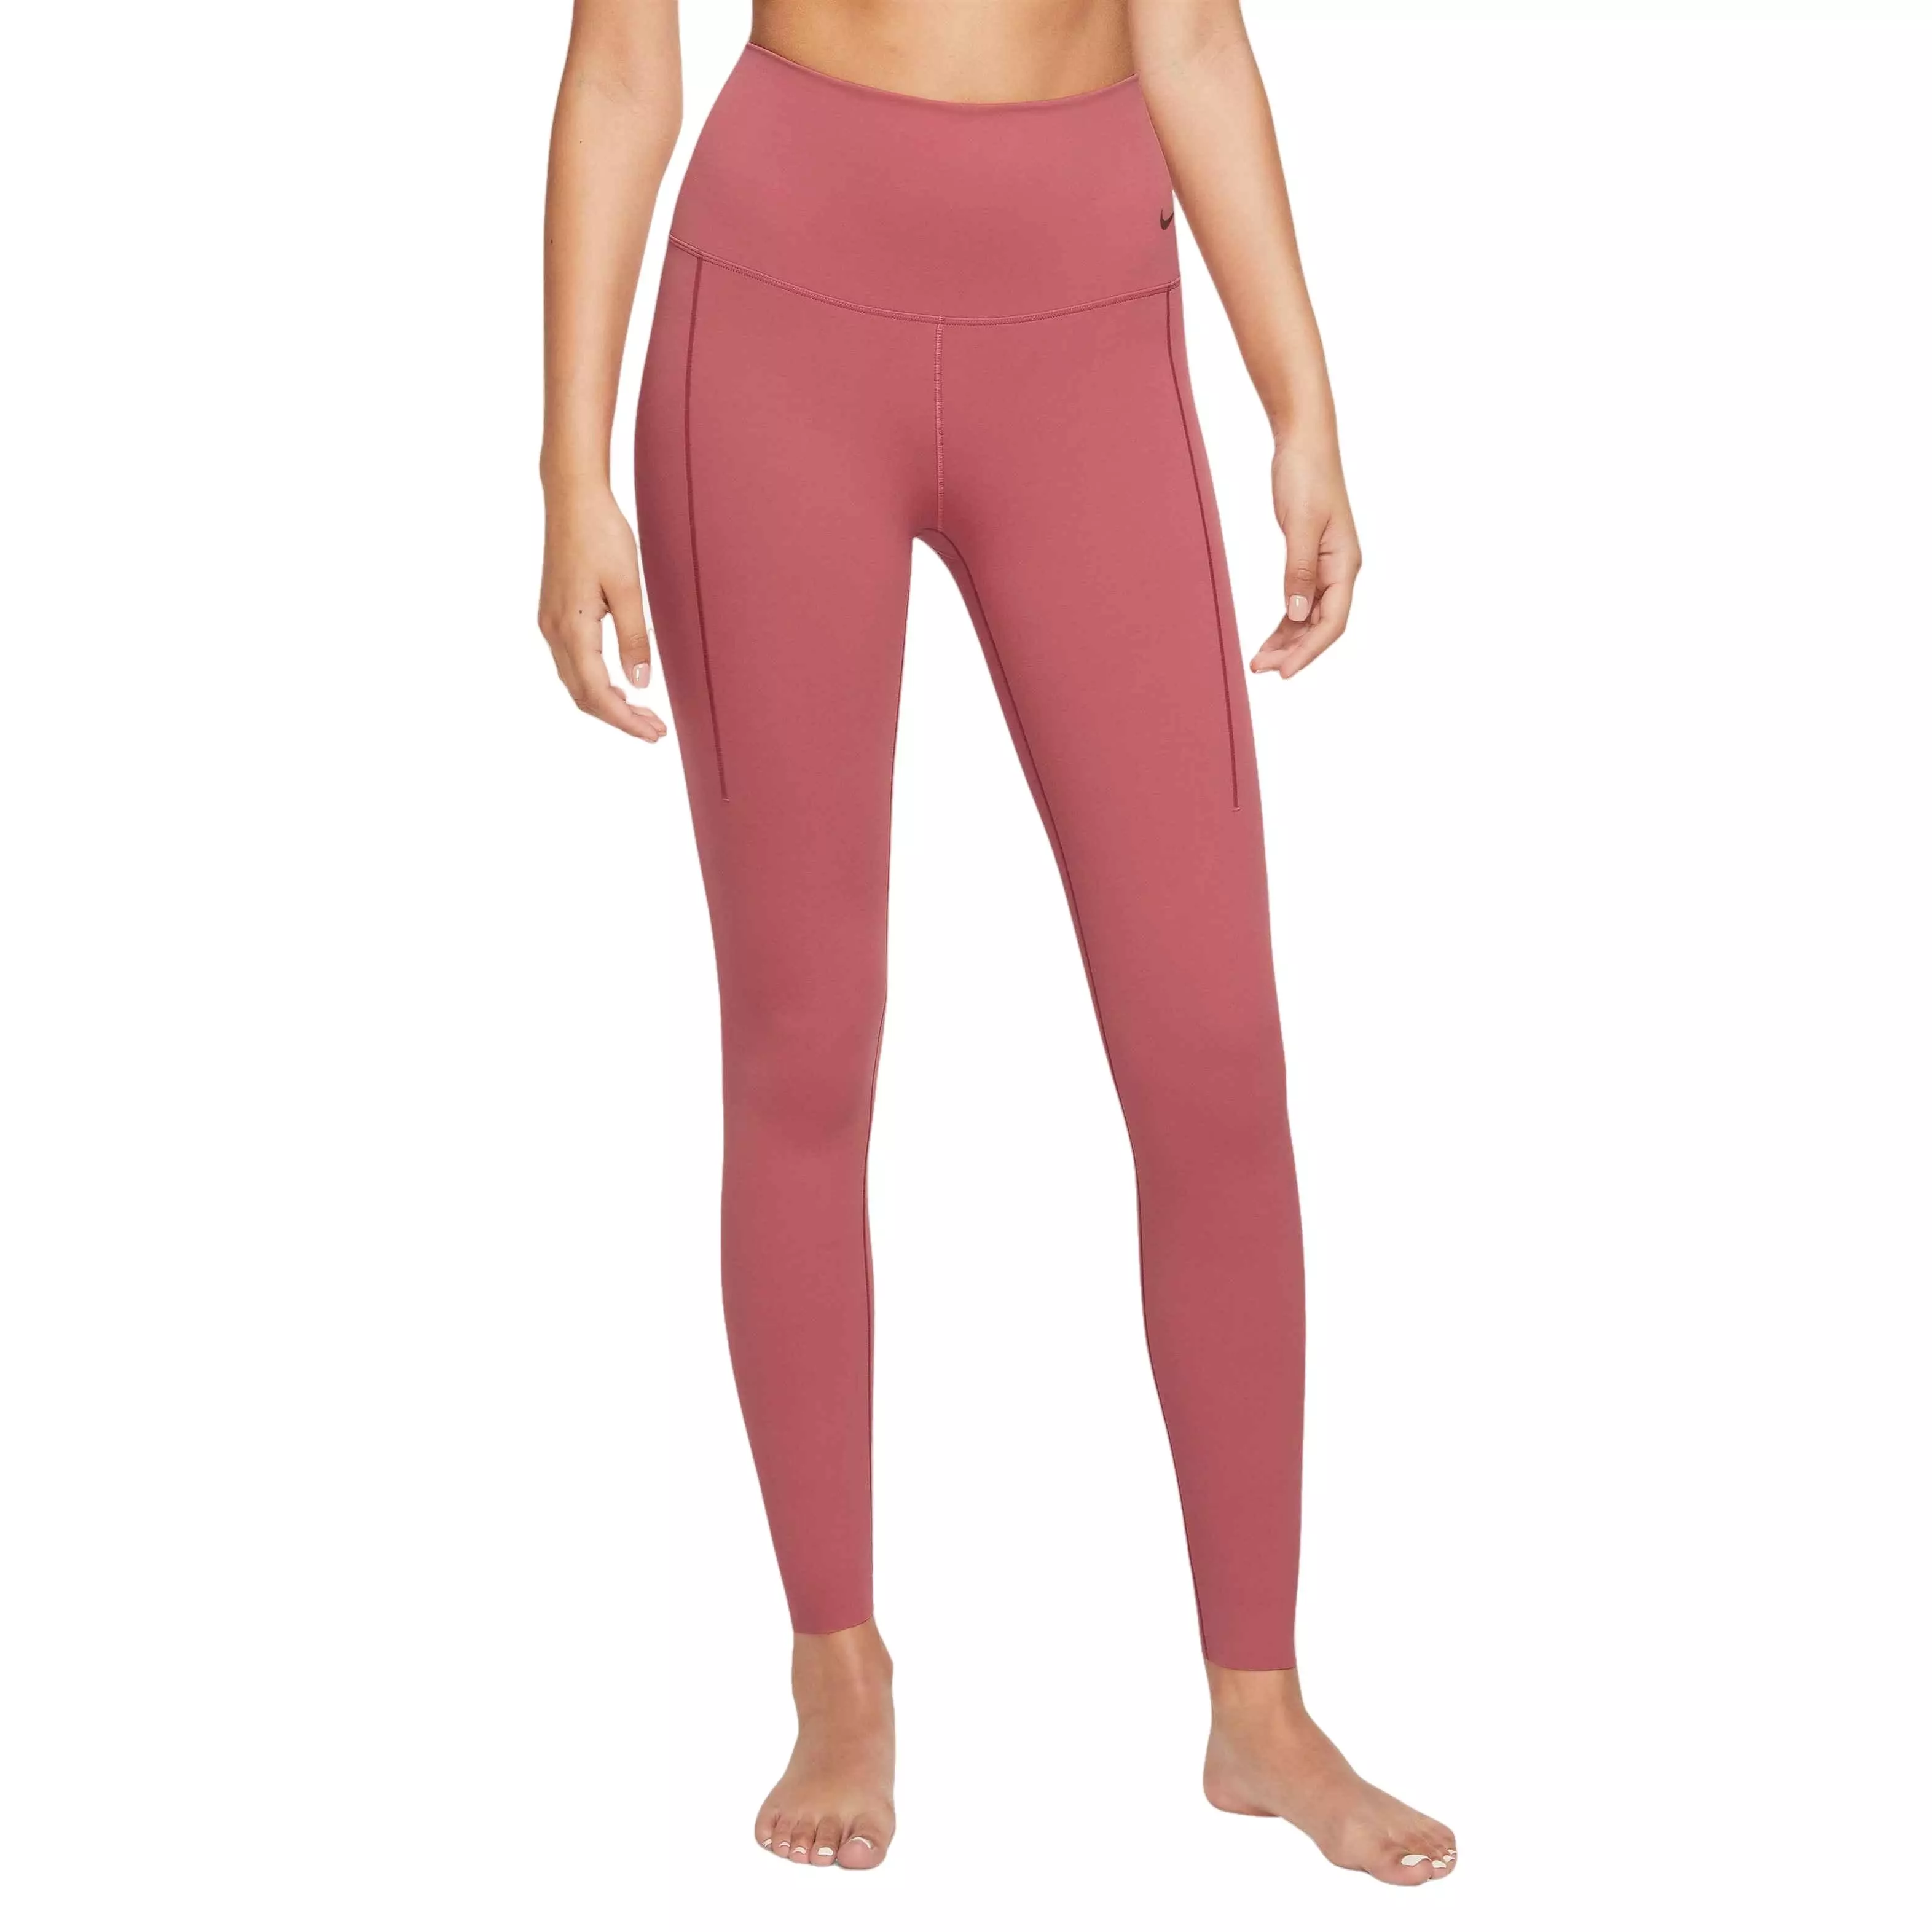 Nike Women's​ Dri-FIT​ Zen​vy​ Yoga Gentle-Support High-Waisted 7